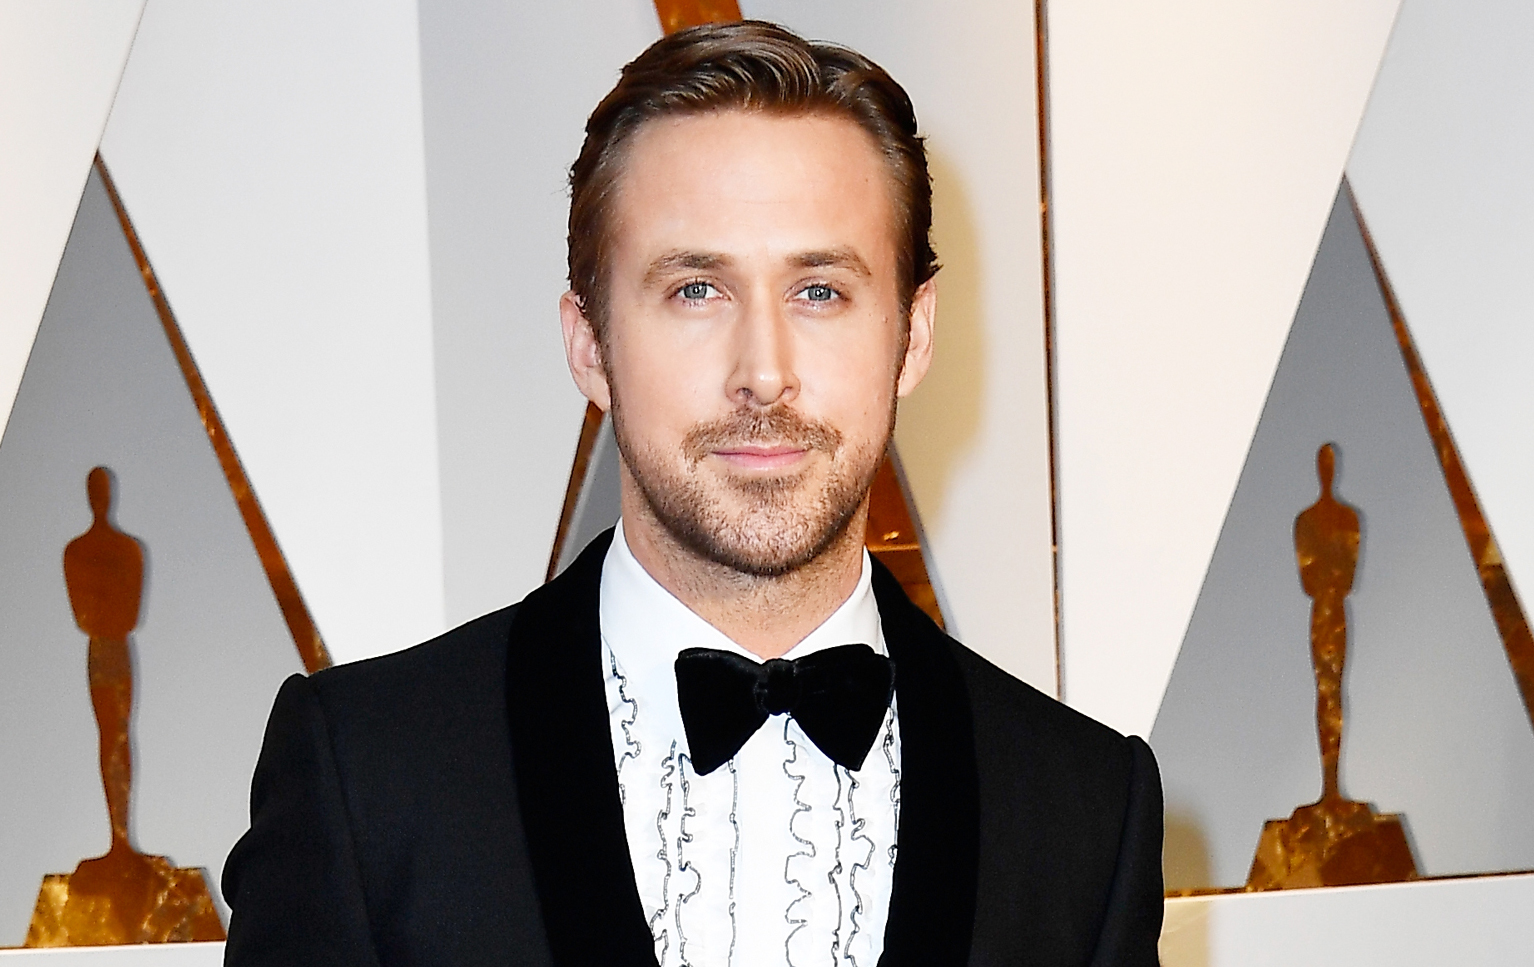 The Enigmatic Ryan Gosling At The Oscars: Inside His Award-Winning Style And Charisma On The Red Carpet